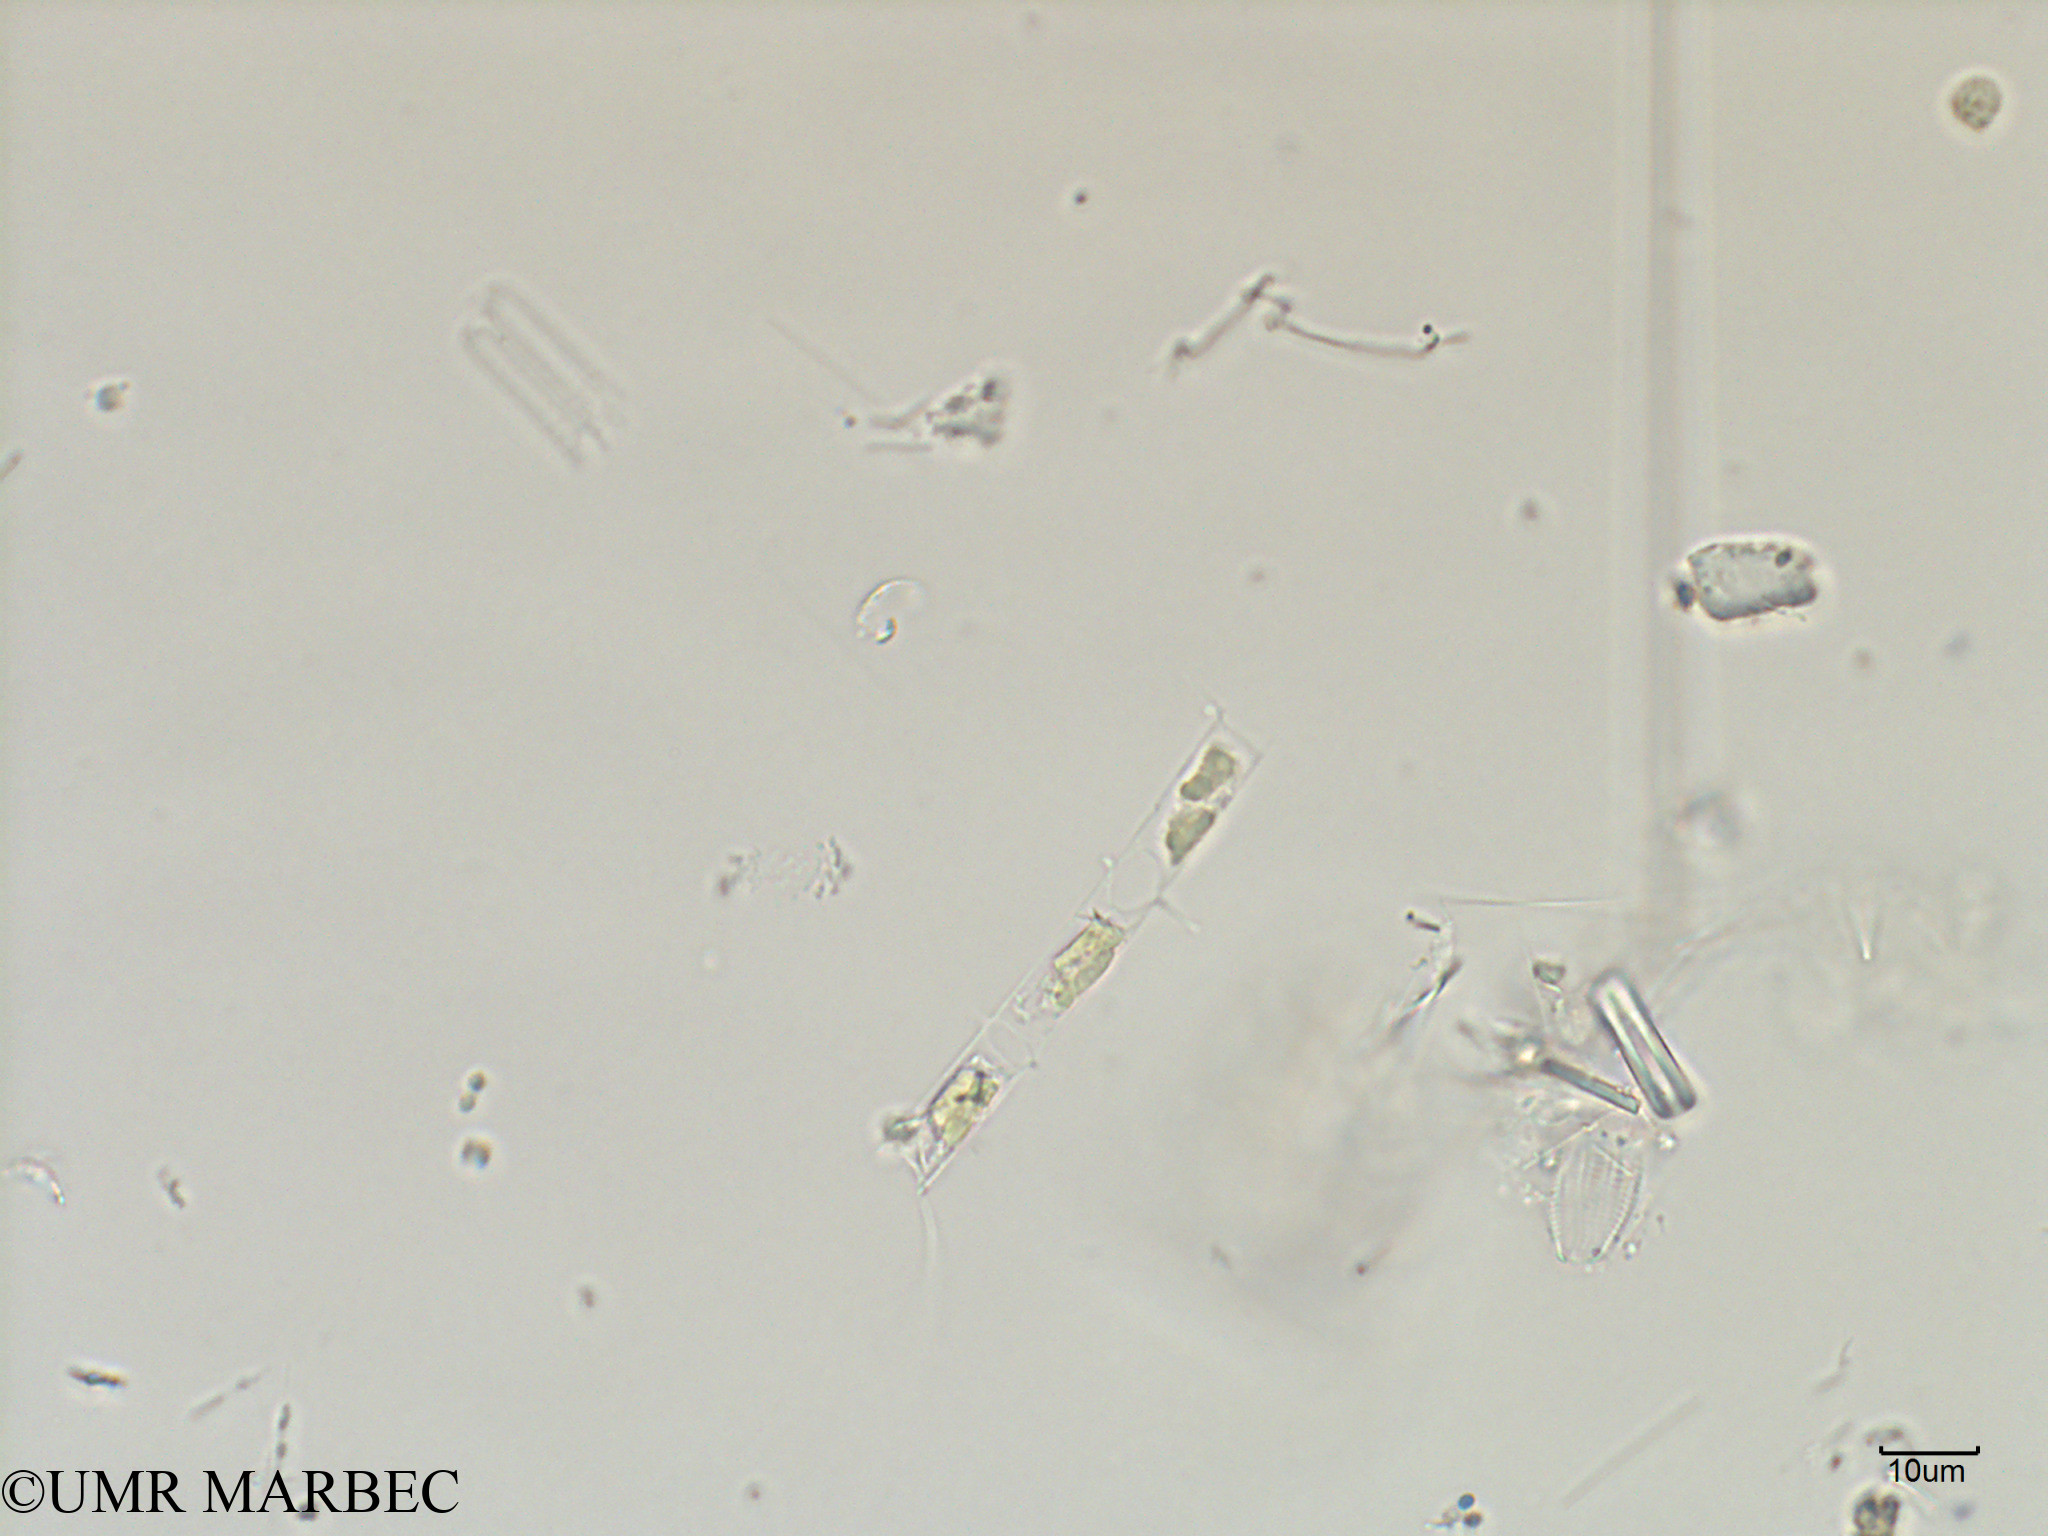 phyto/Scattered_Islands/iles_glorieuses/SIREME May 2016/Chaetoceros sp44 (ancien Chaetoceros sp12 -SIREME-Glorieuses2016-GLO6surf-271016-Chaetoceros-6)(copy).jpg